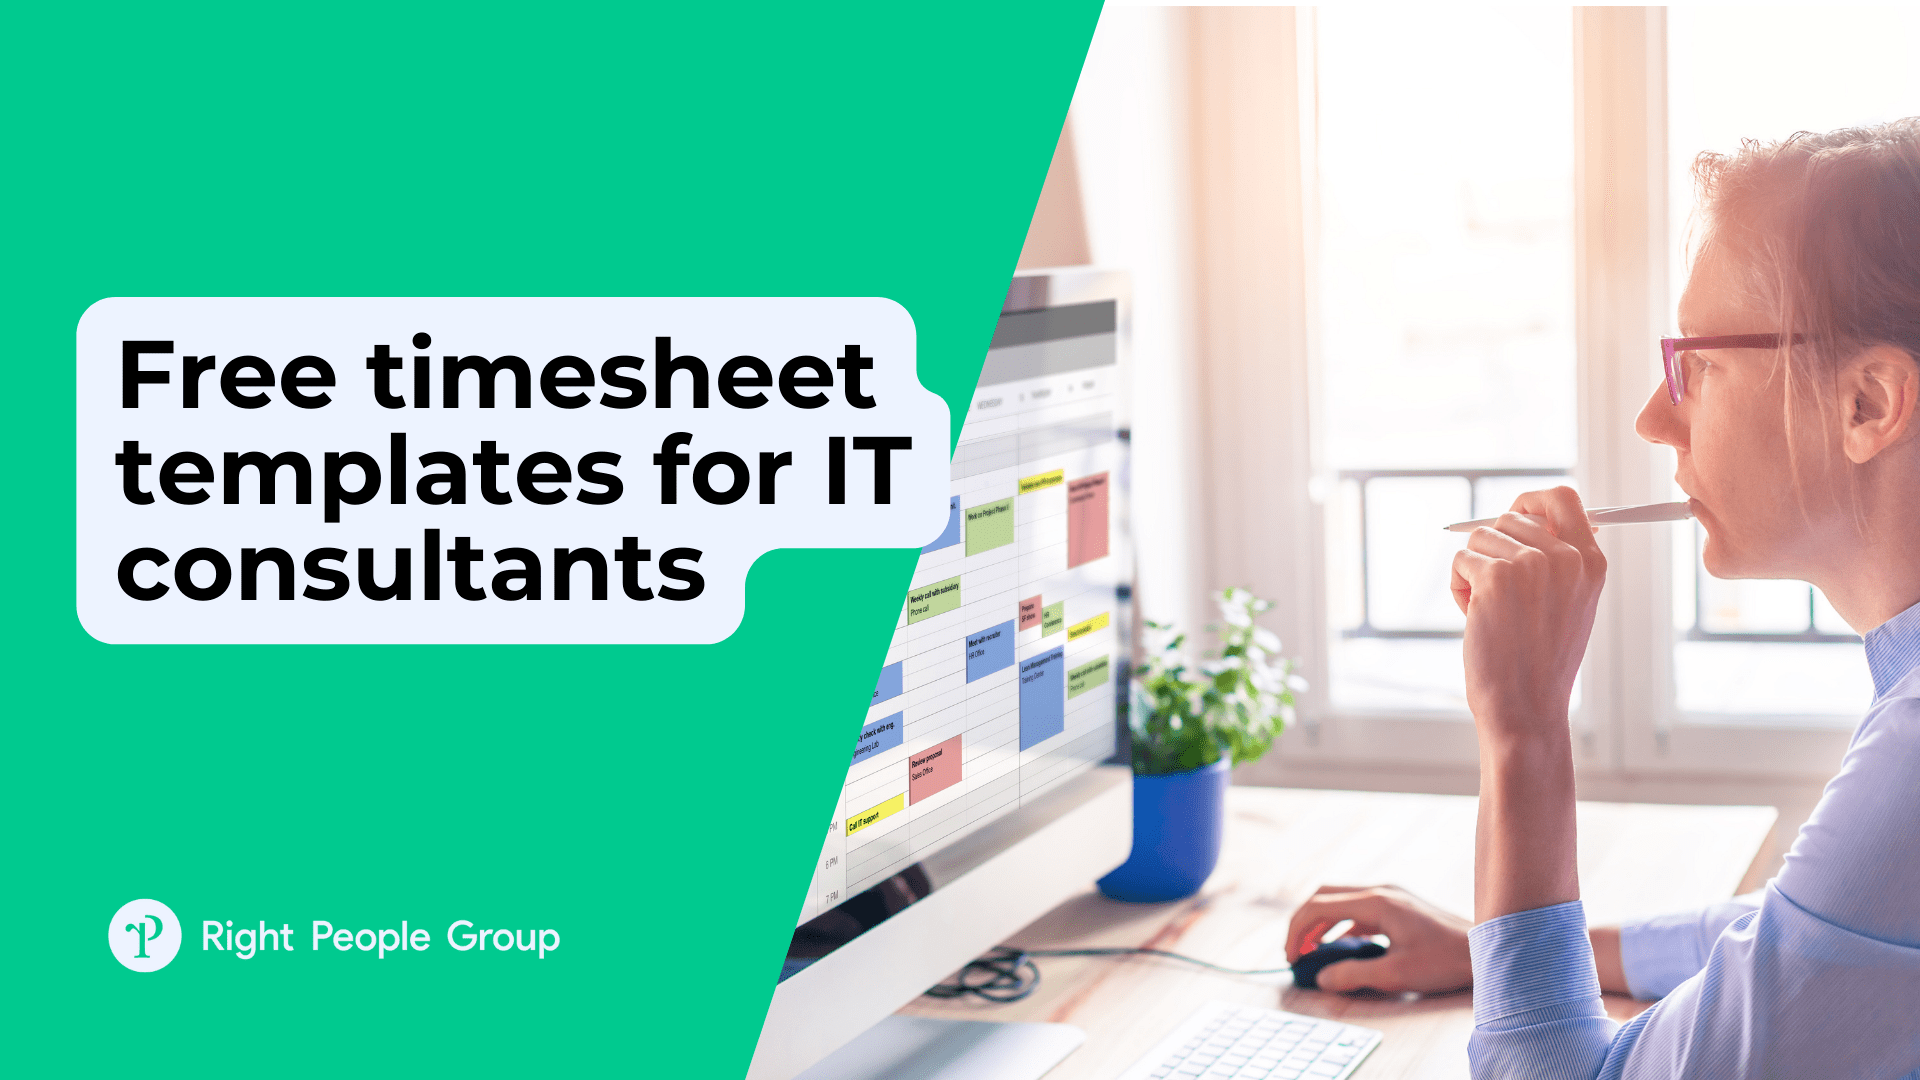 Free consultant timesheet templates on Excel to help you streamline your time tracking